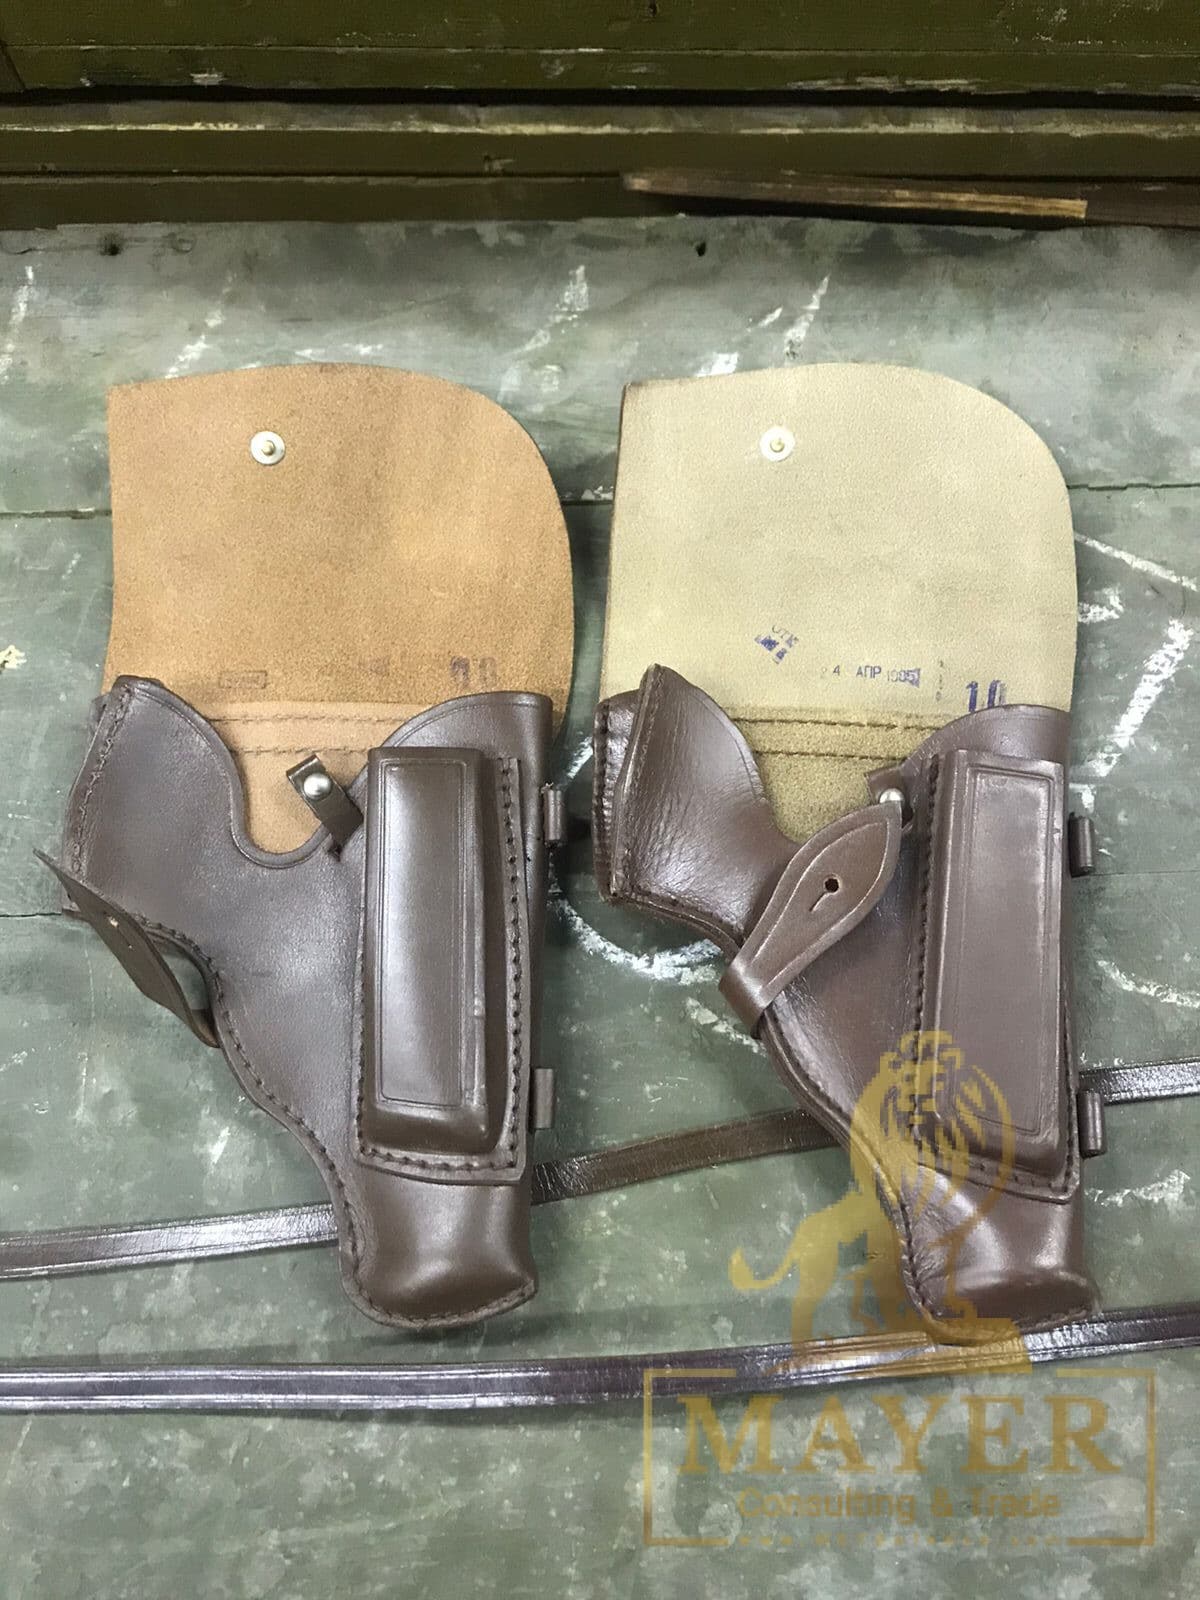 Russian Makarov pistol leather holsters